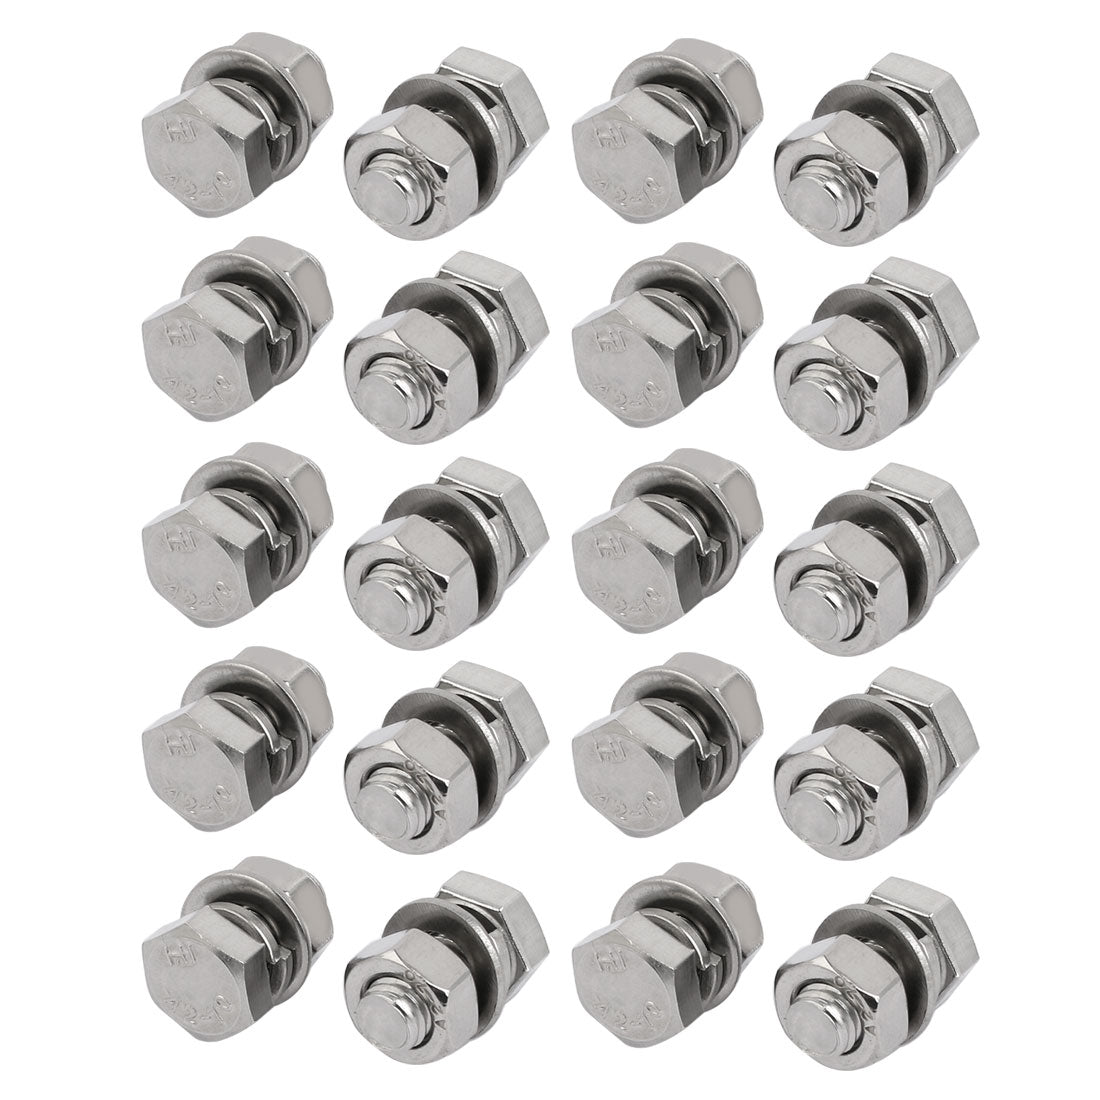 uxcell Uxcell 20 Set M8x20mm 304 Stainless Steel Hex Bolts w Nuts and Washers Assortment Kit